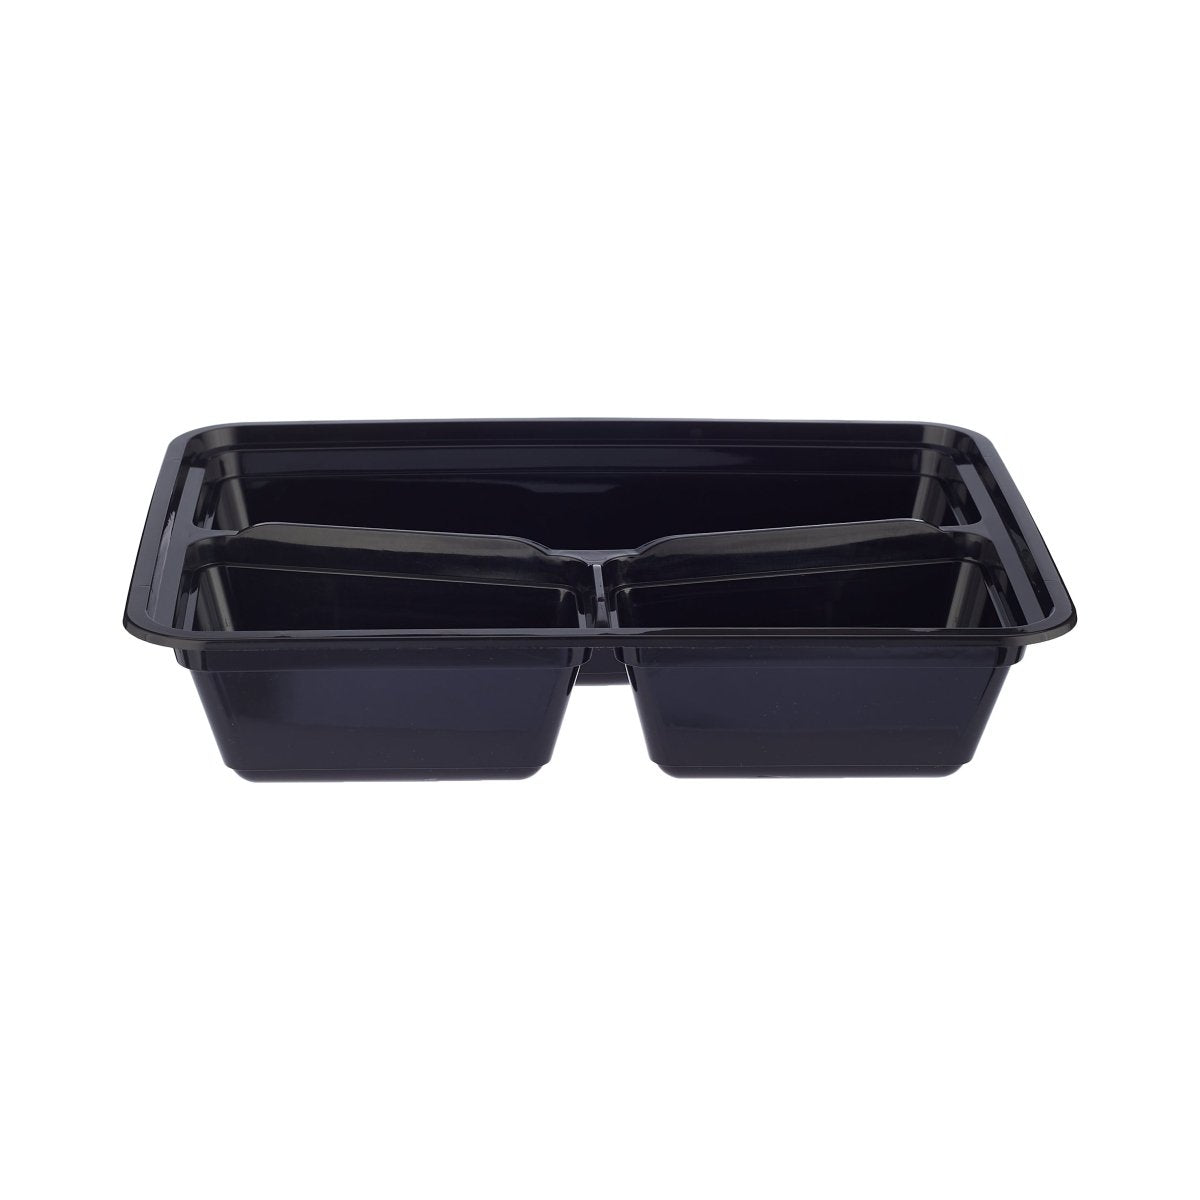 Black Base Rectangular Microwavable Compartment Container with Lids 5 Pieces - hotpackwebstore.com - Black Base Containers